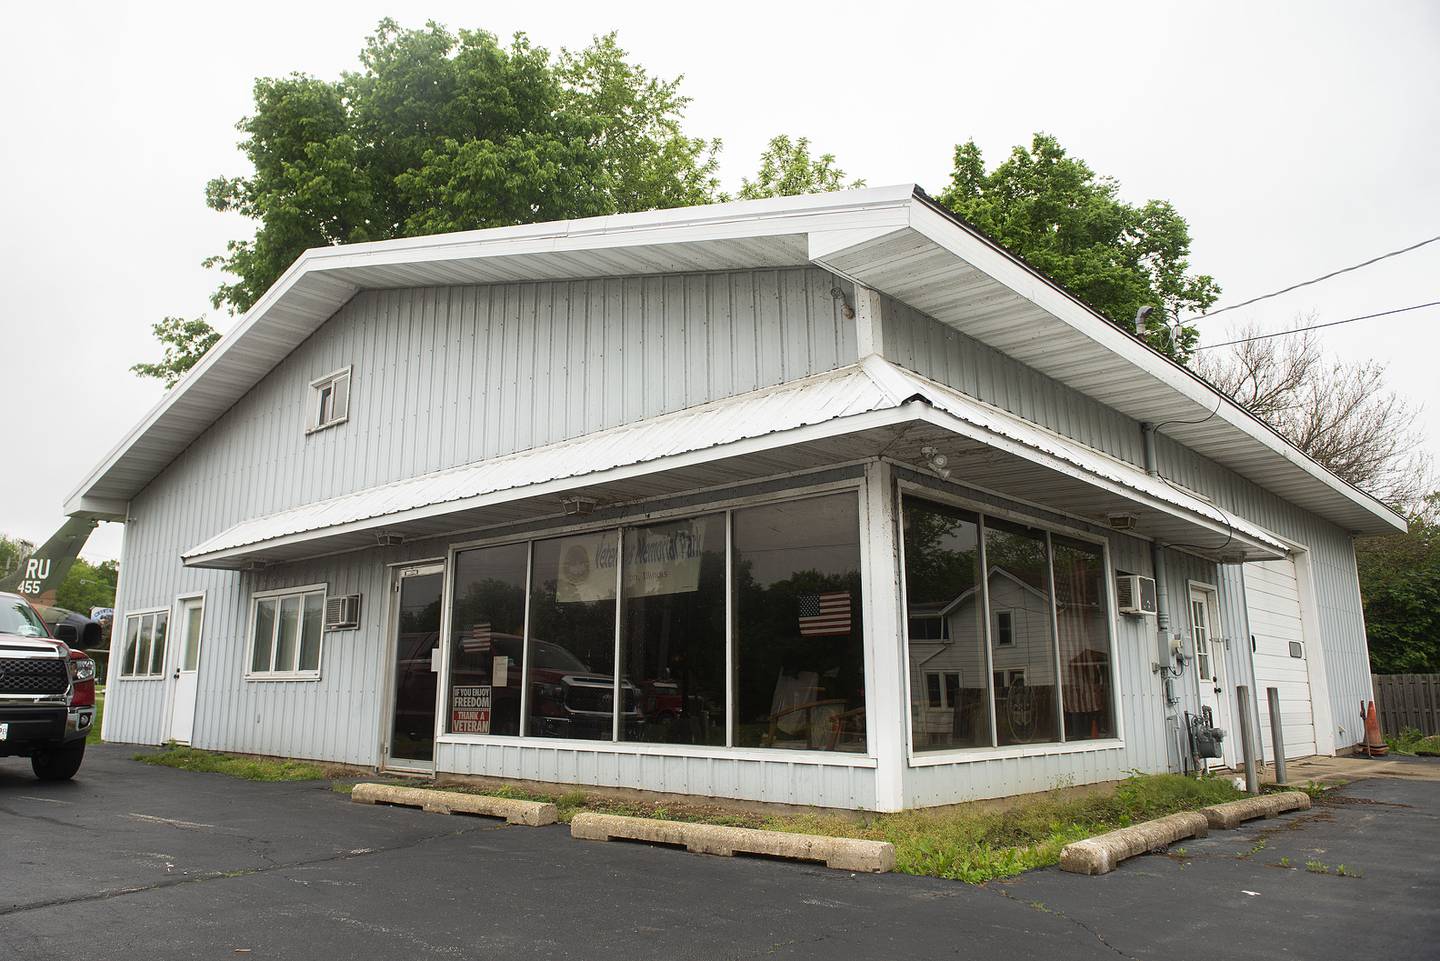 The building used to be Ron’s Auto Repair. The board bought the property about two years ago.